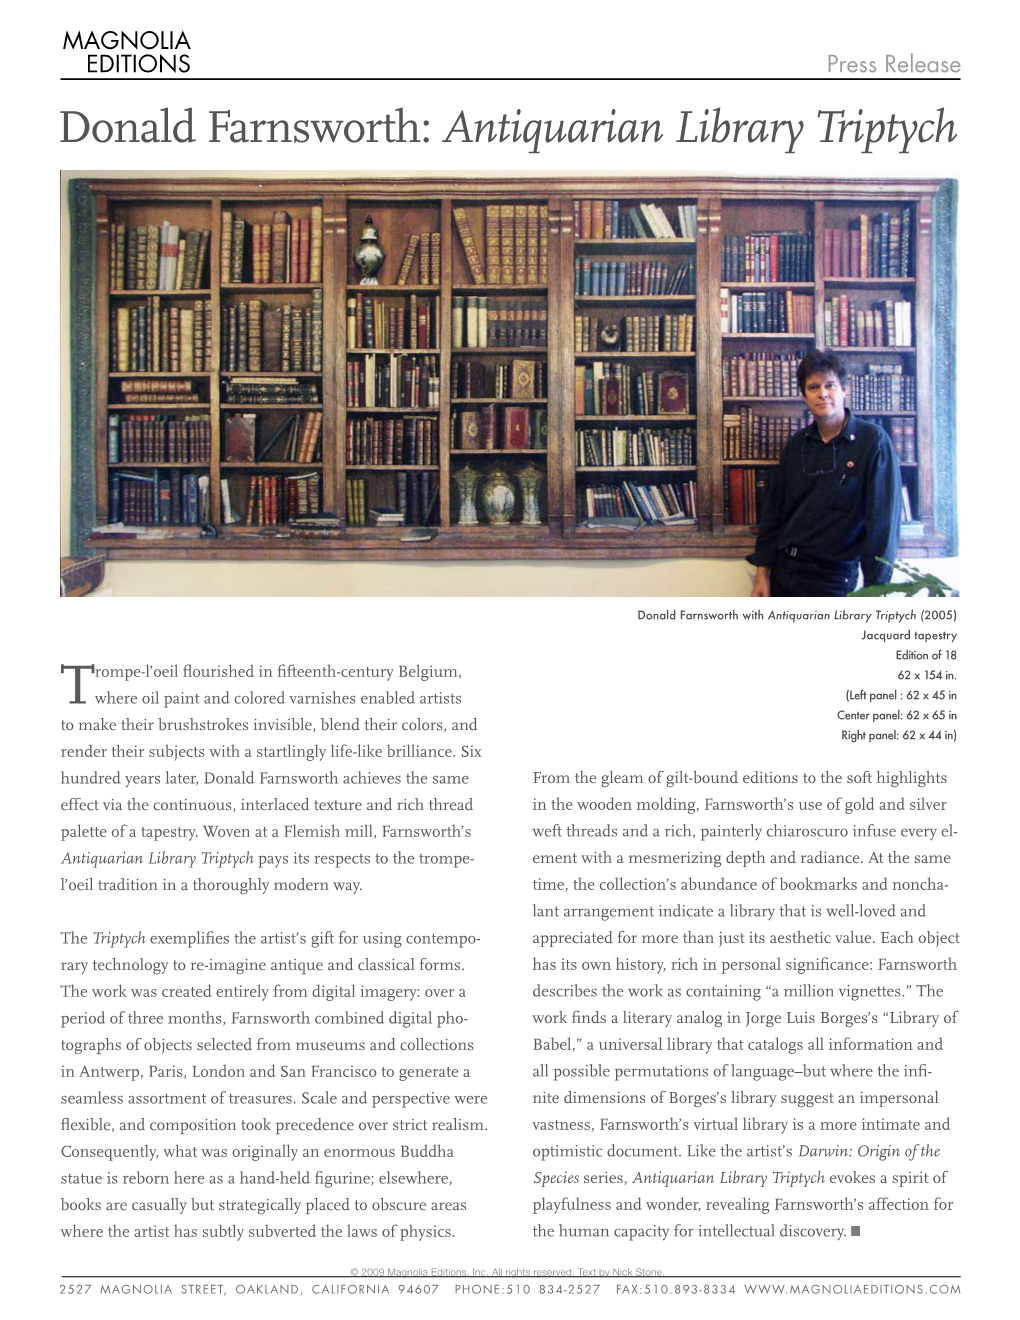 Donald Farnsworth: Antiquarian Library Triptych